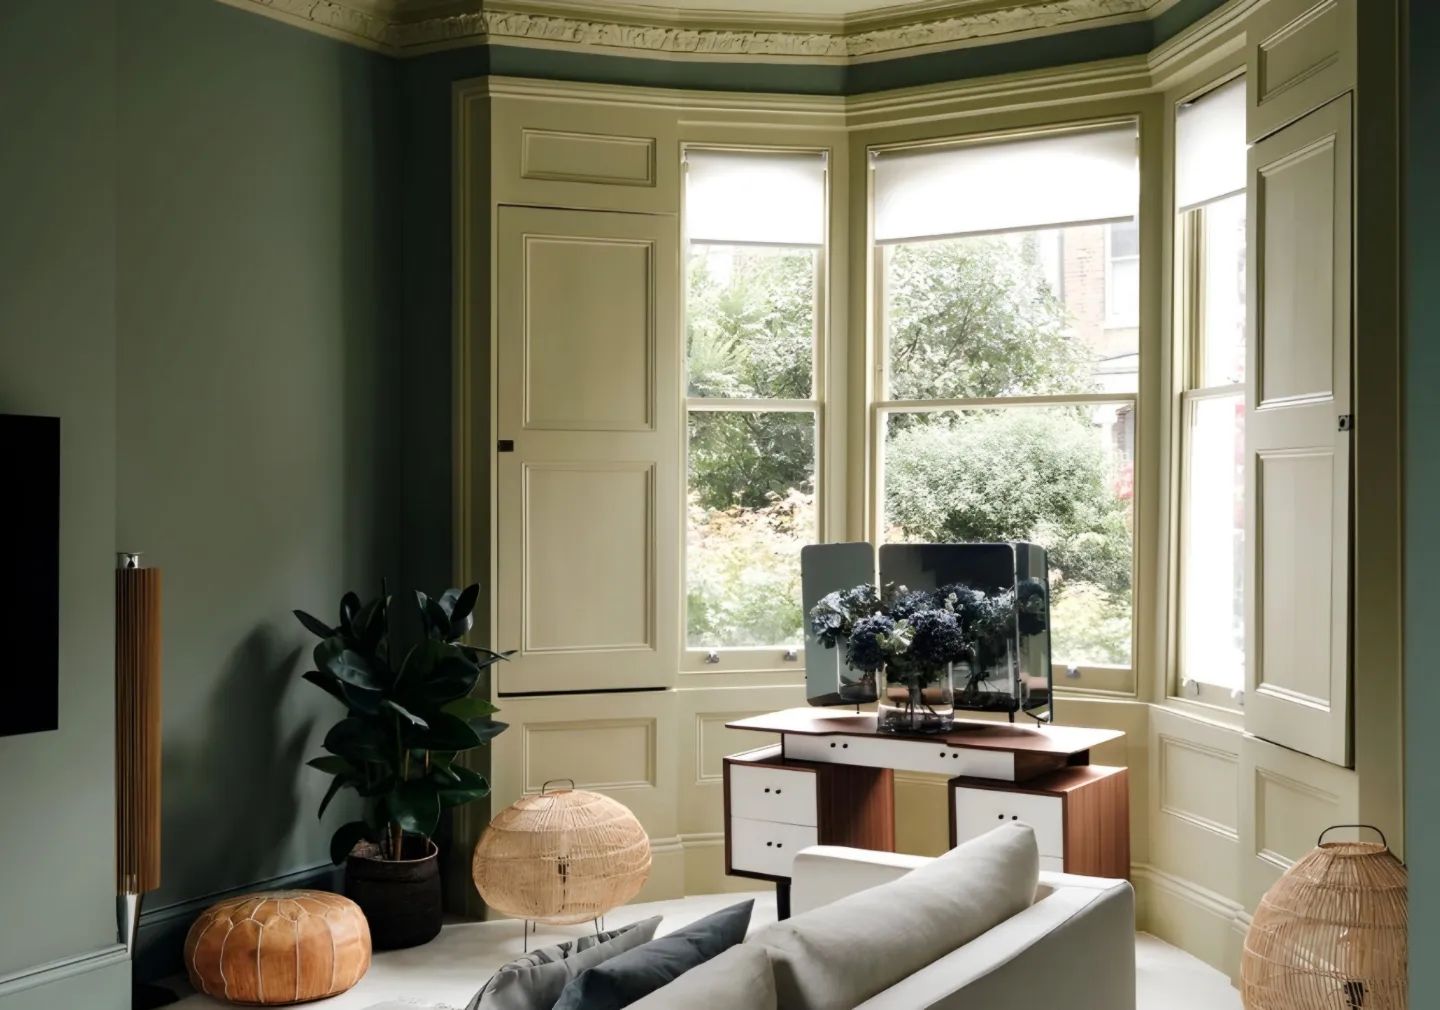 The stunning Hampstead home of Amanda Jennings features walls in Serpentine™ No.192 by Mylands of London with woodwork in London Plane™ No.200 also by @mylands_london 😍